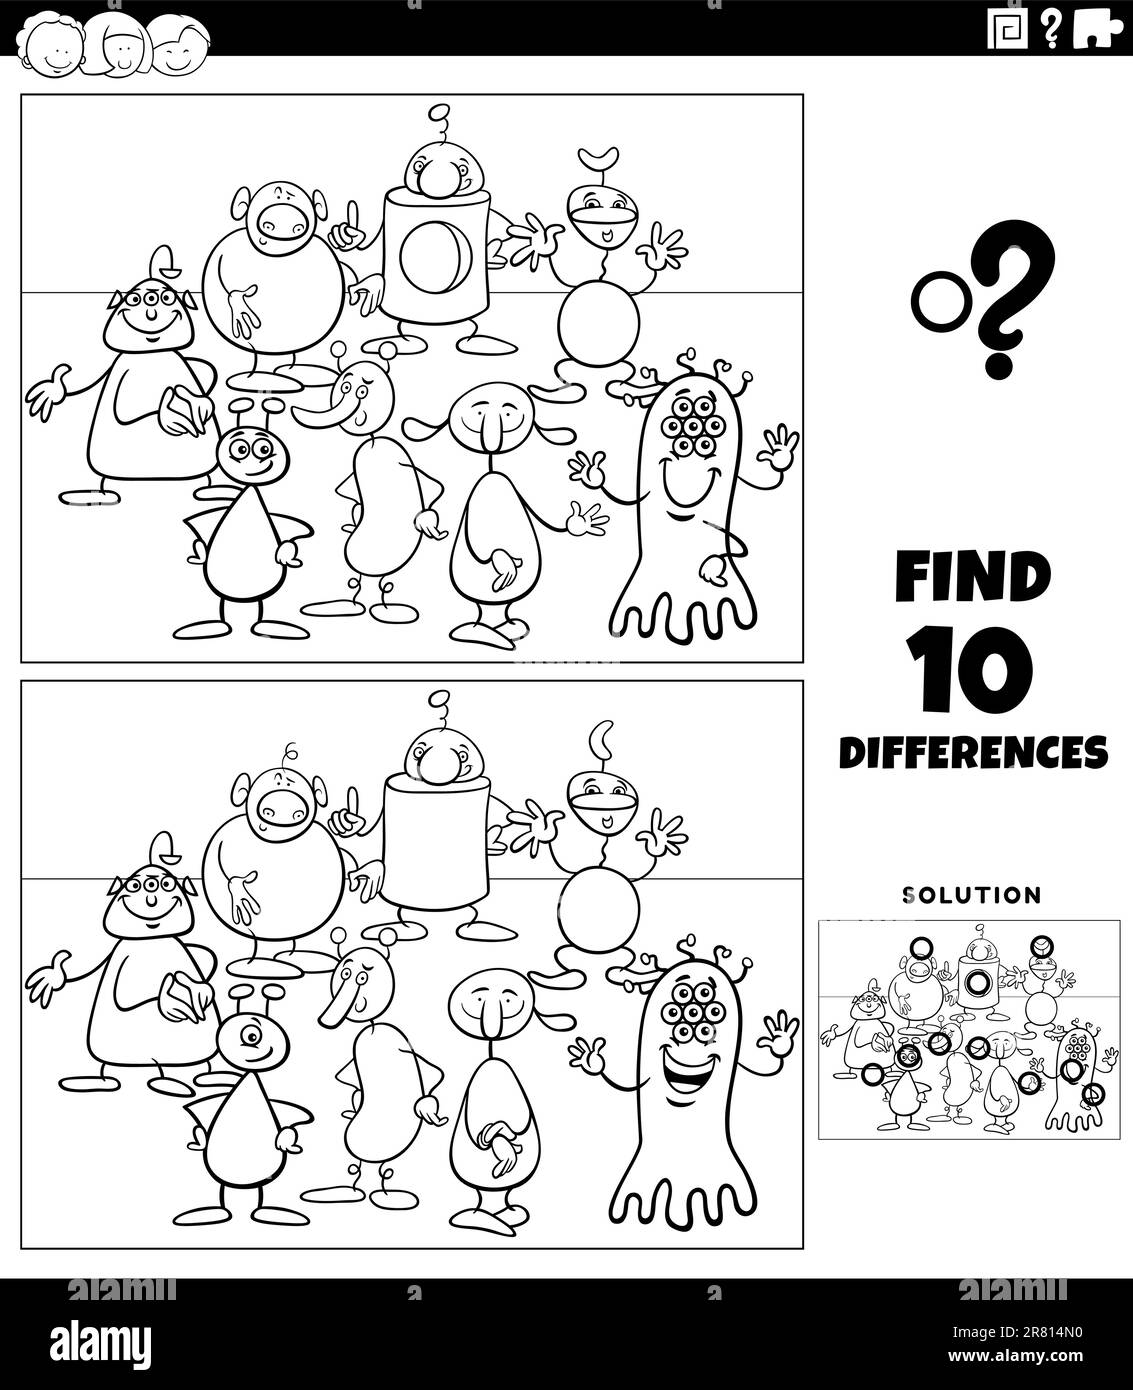 Black and white cartoon illustration of finding the differences between pictures educational game with aliens or monsters characters group coloring pa Stock Vector